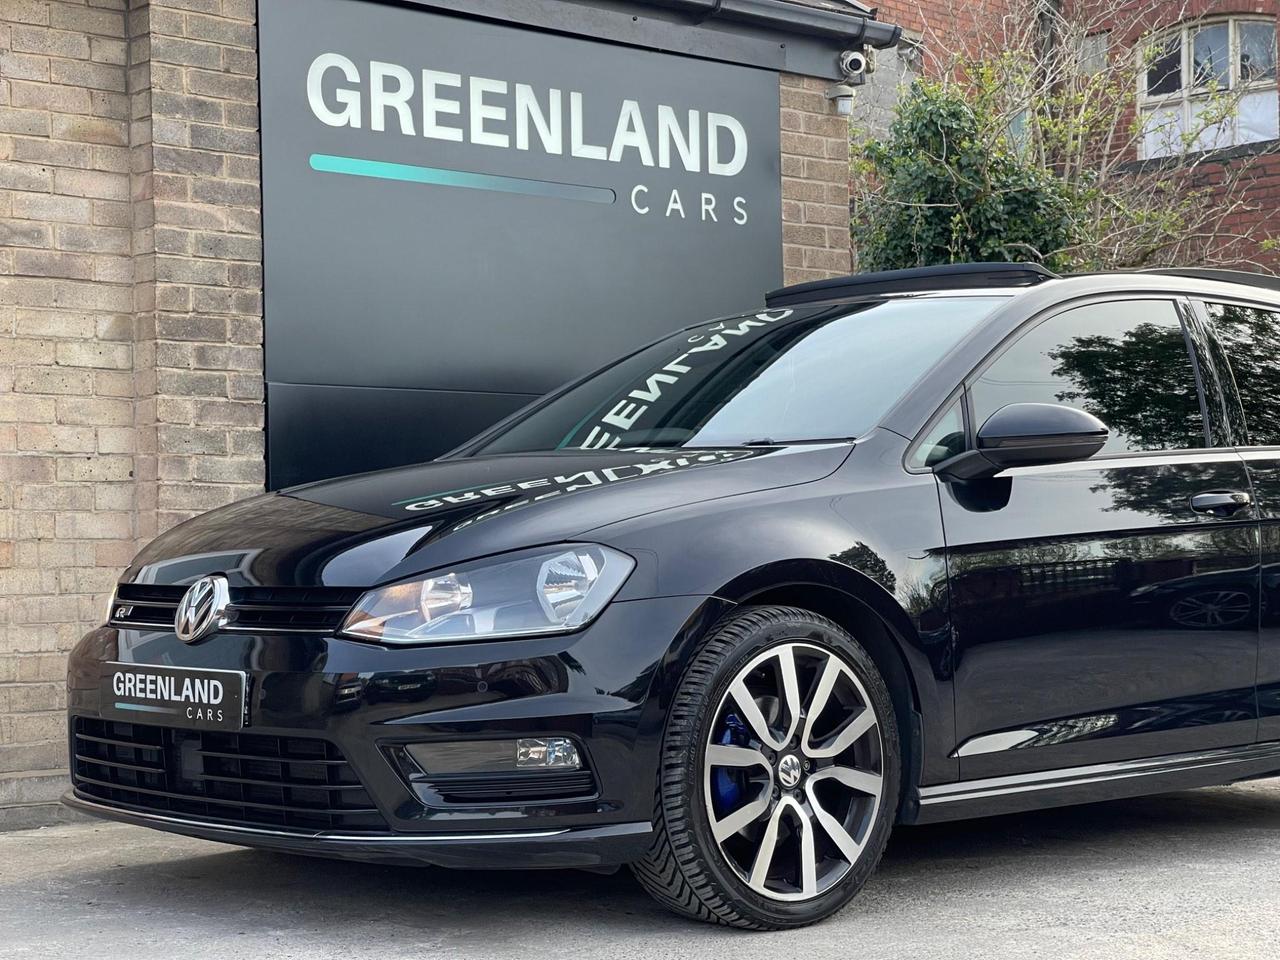 Used 2016 Volkswagen Golf for sale in Sheffield